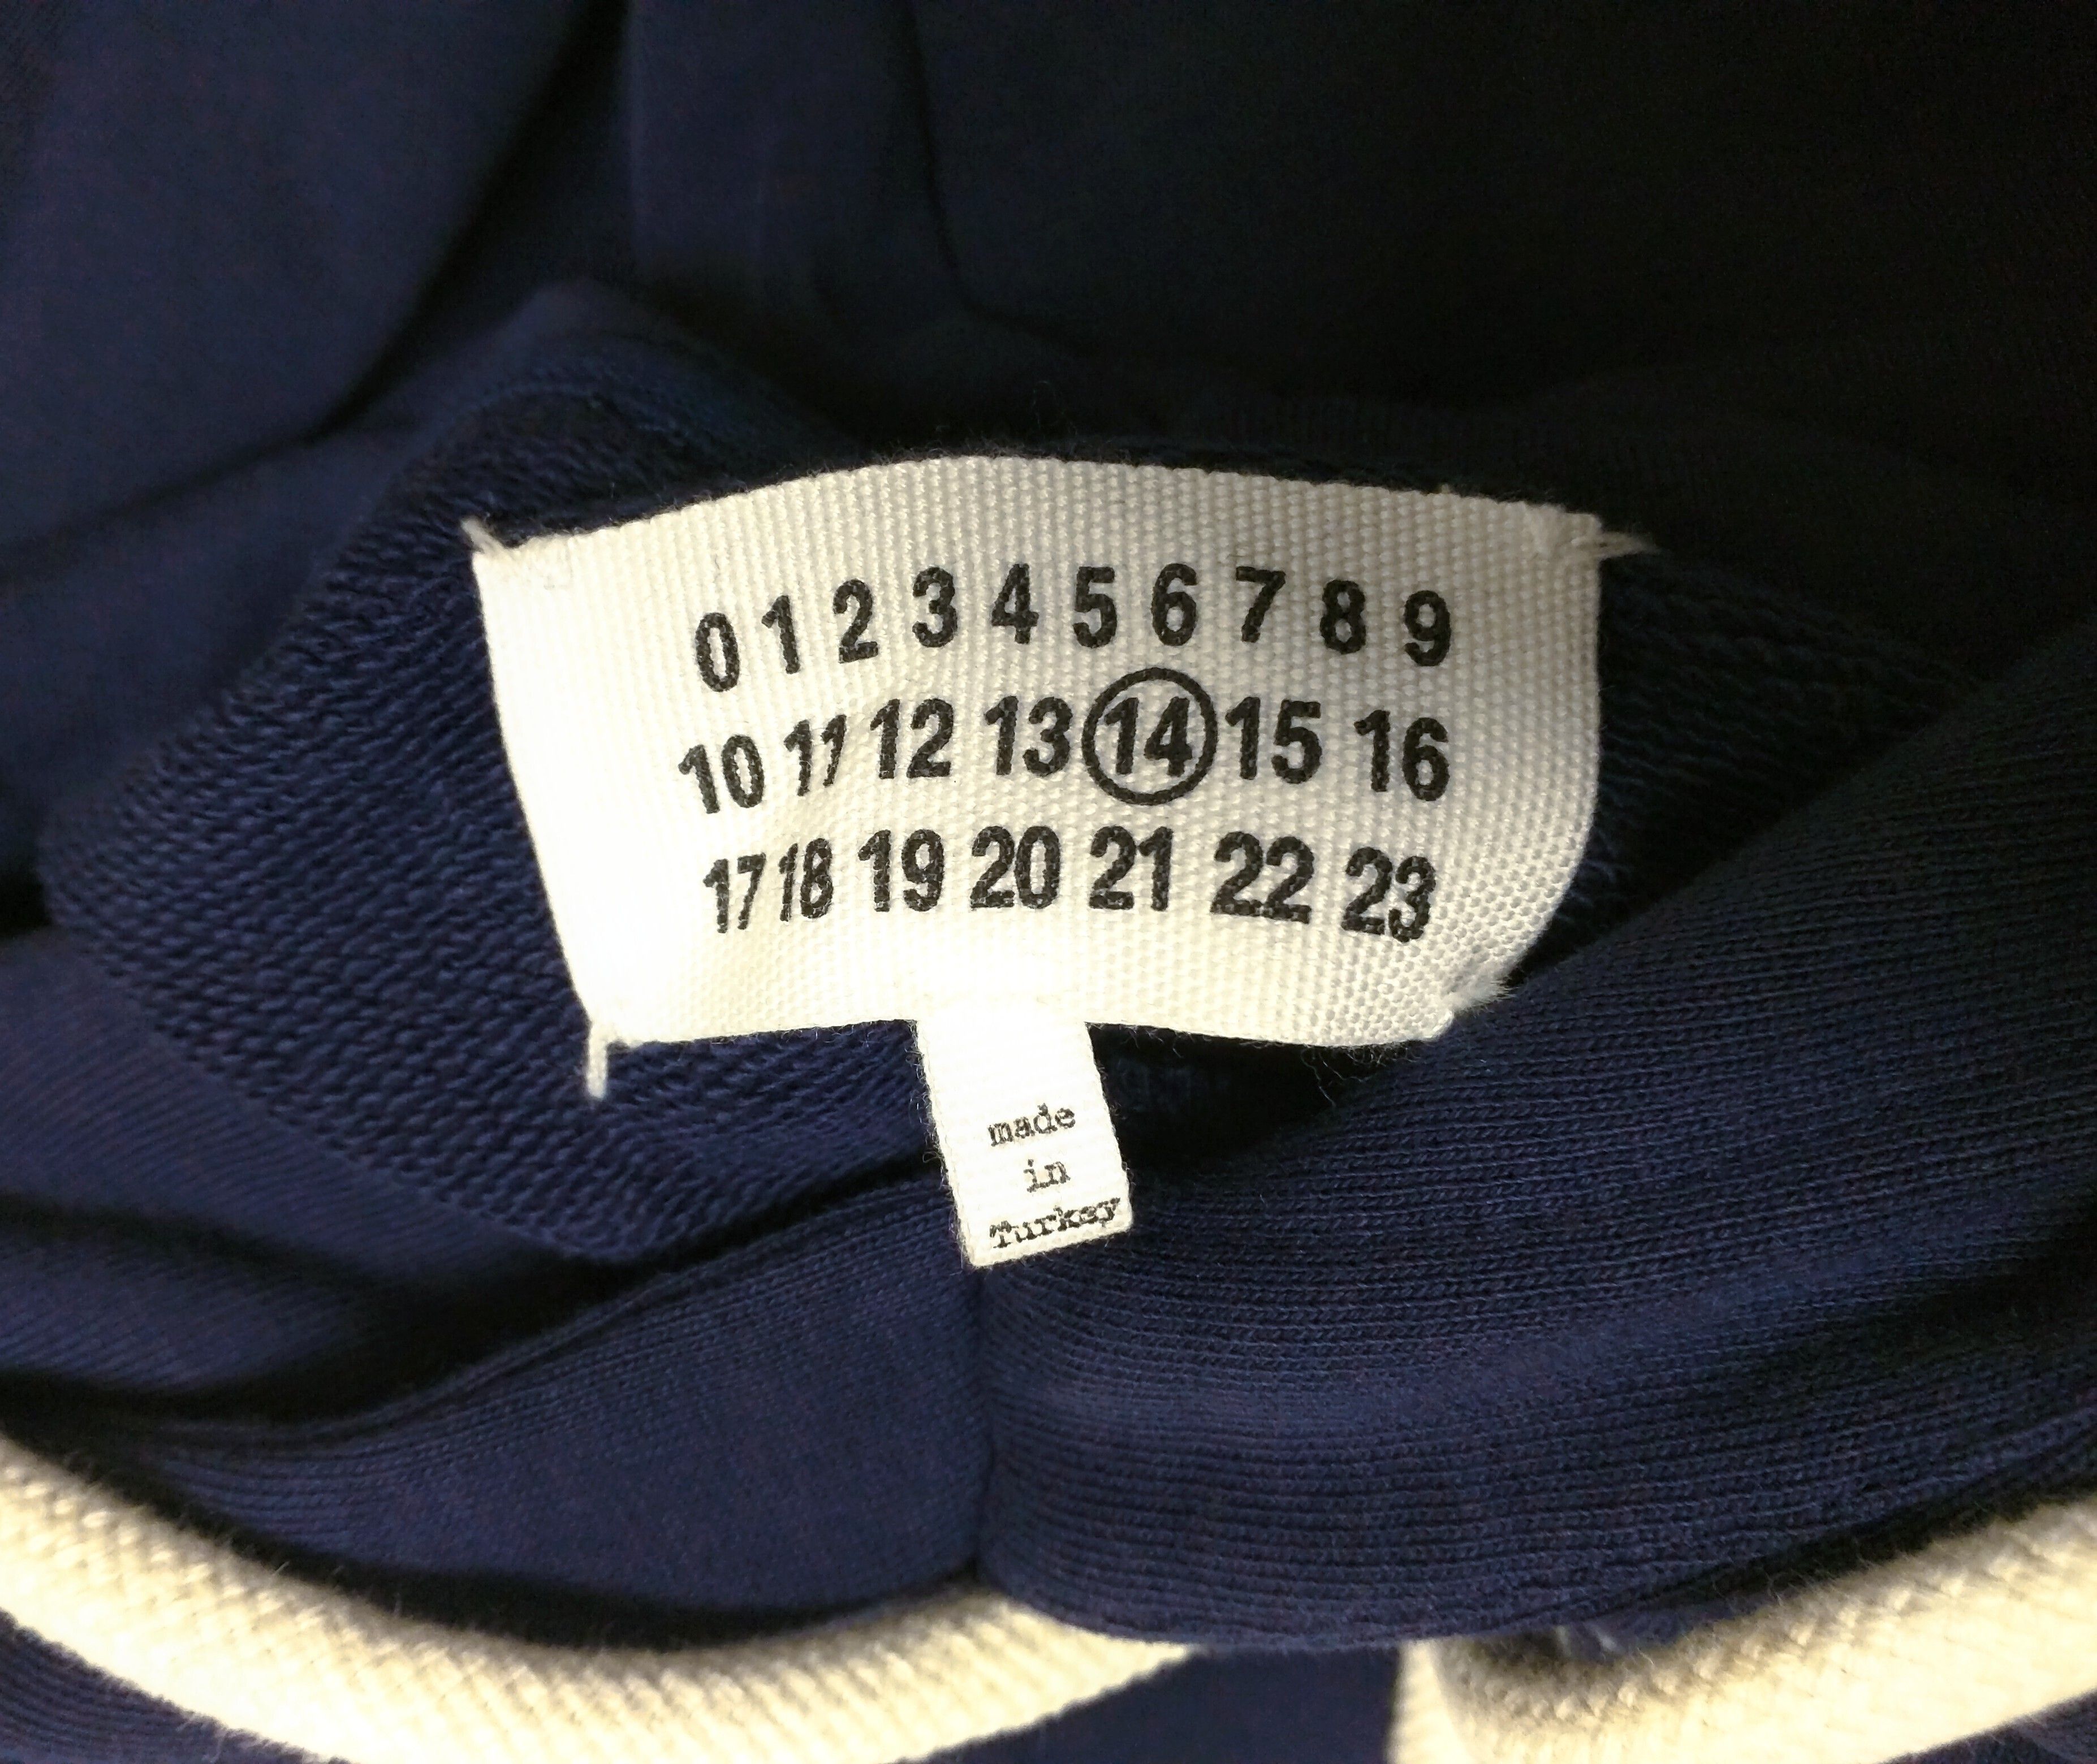 Maison Margiela Stereotype Hoodie Navy Blue 48 MMM Pullover Size US L / EU 52-54 / 3 - 4 Thumbnail